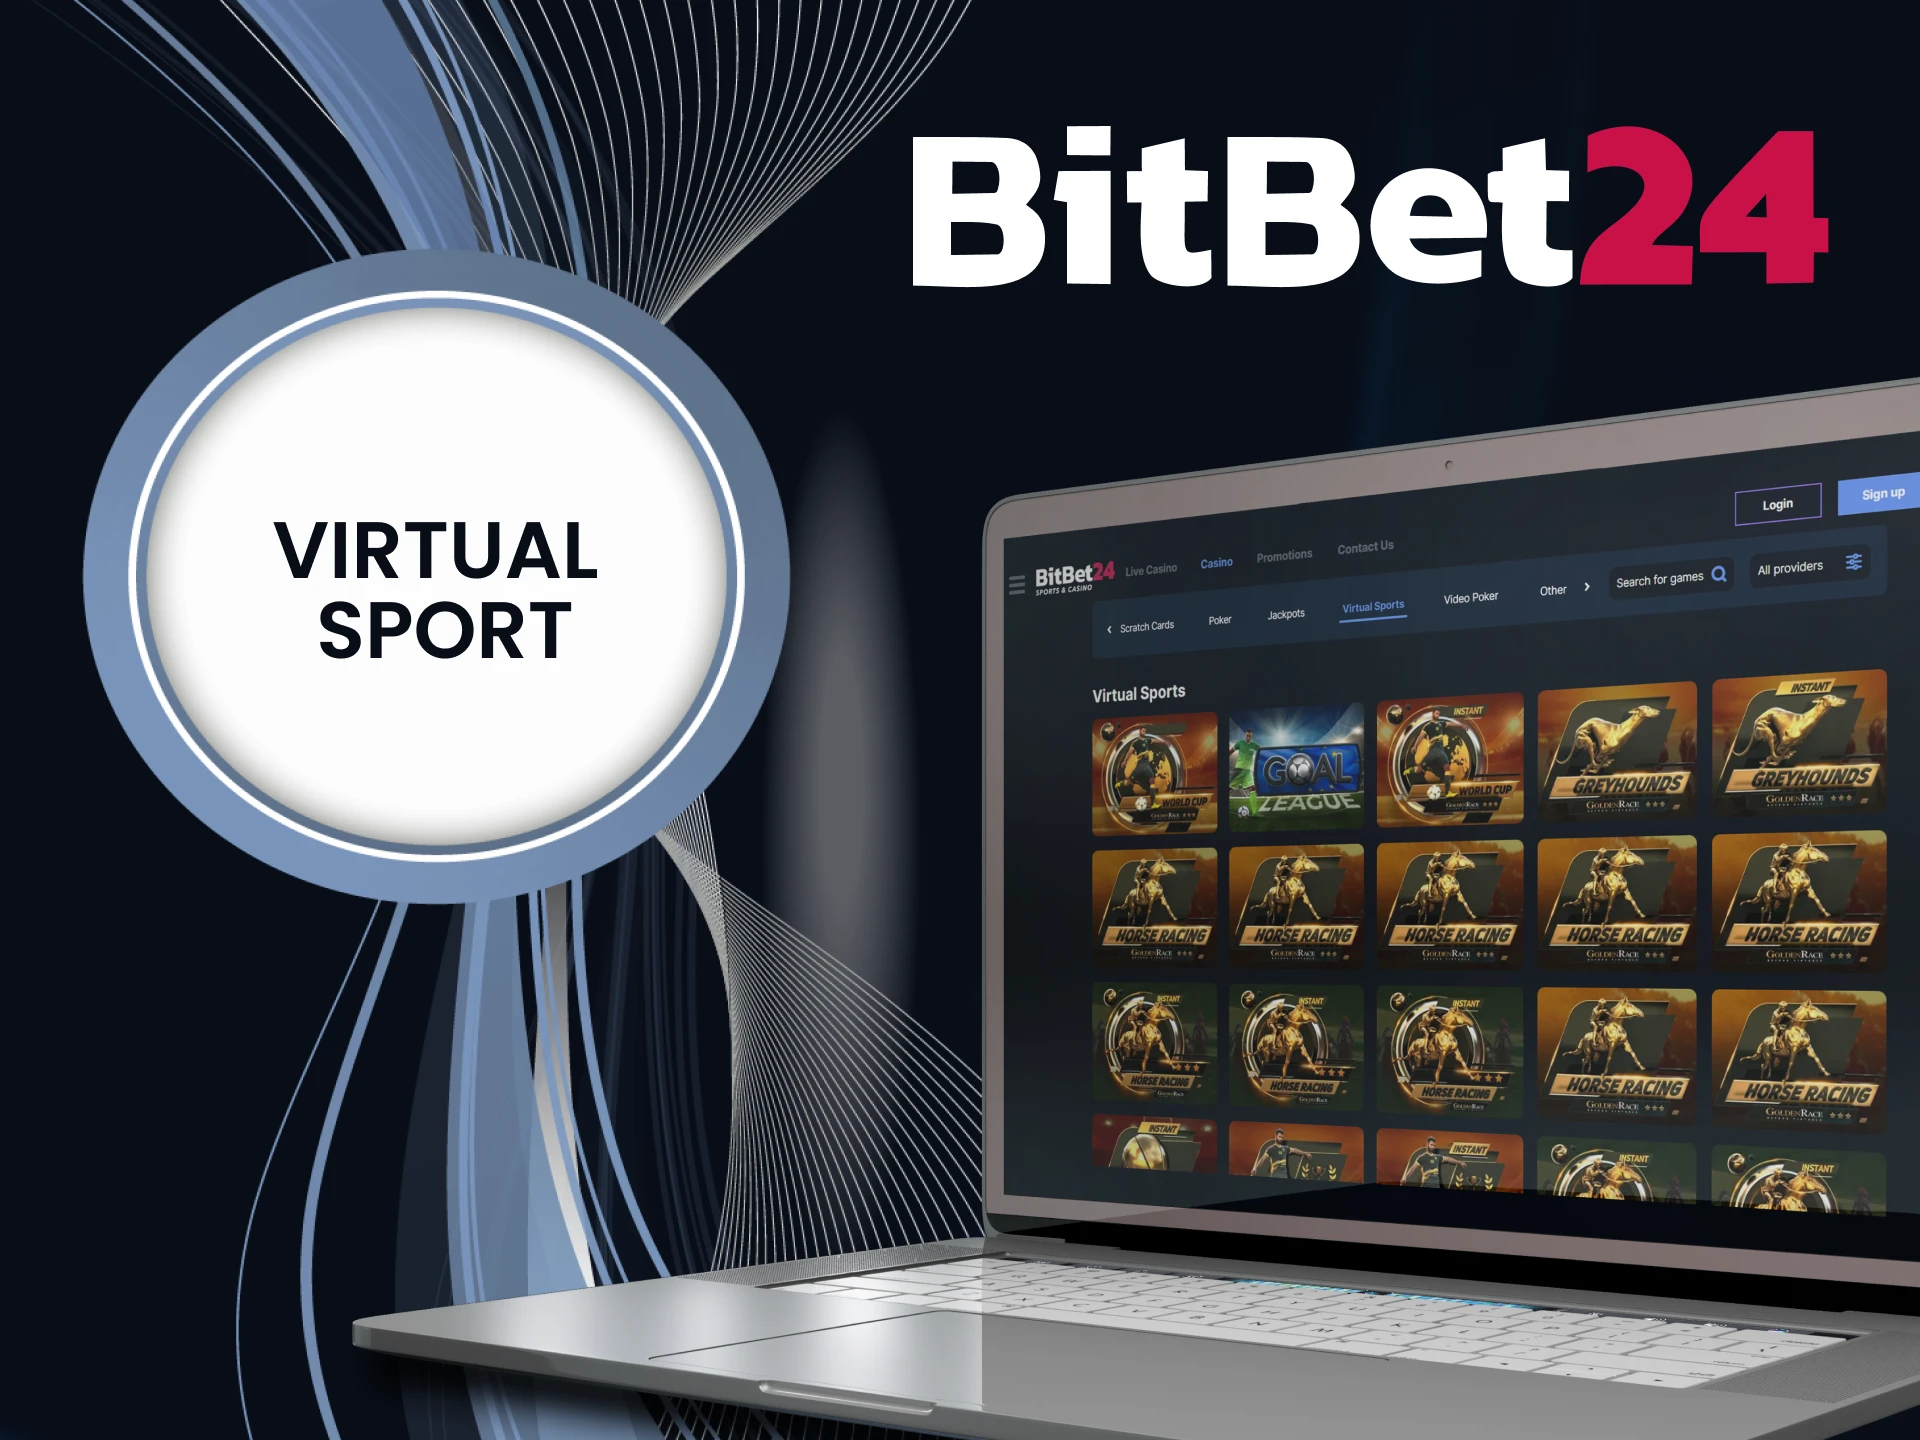 Bet on virtual sports with BitBet24.